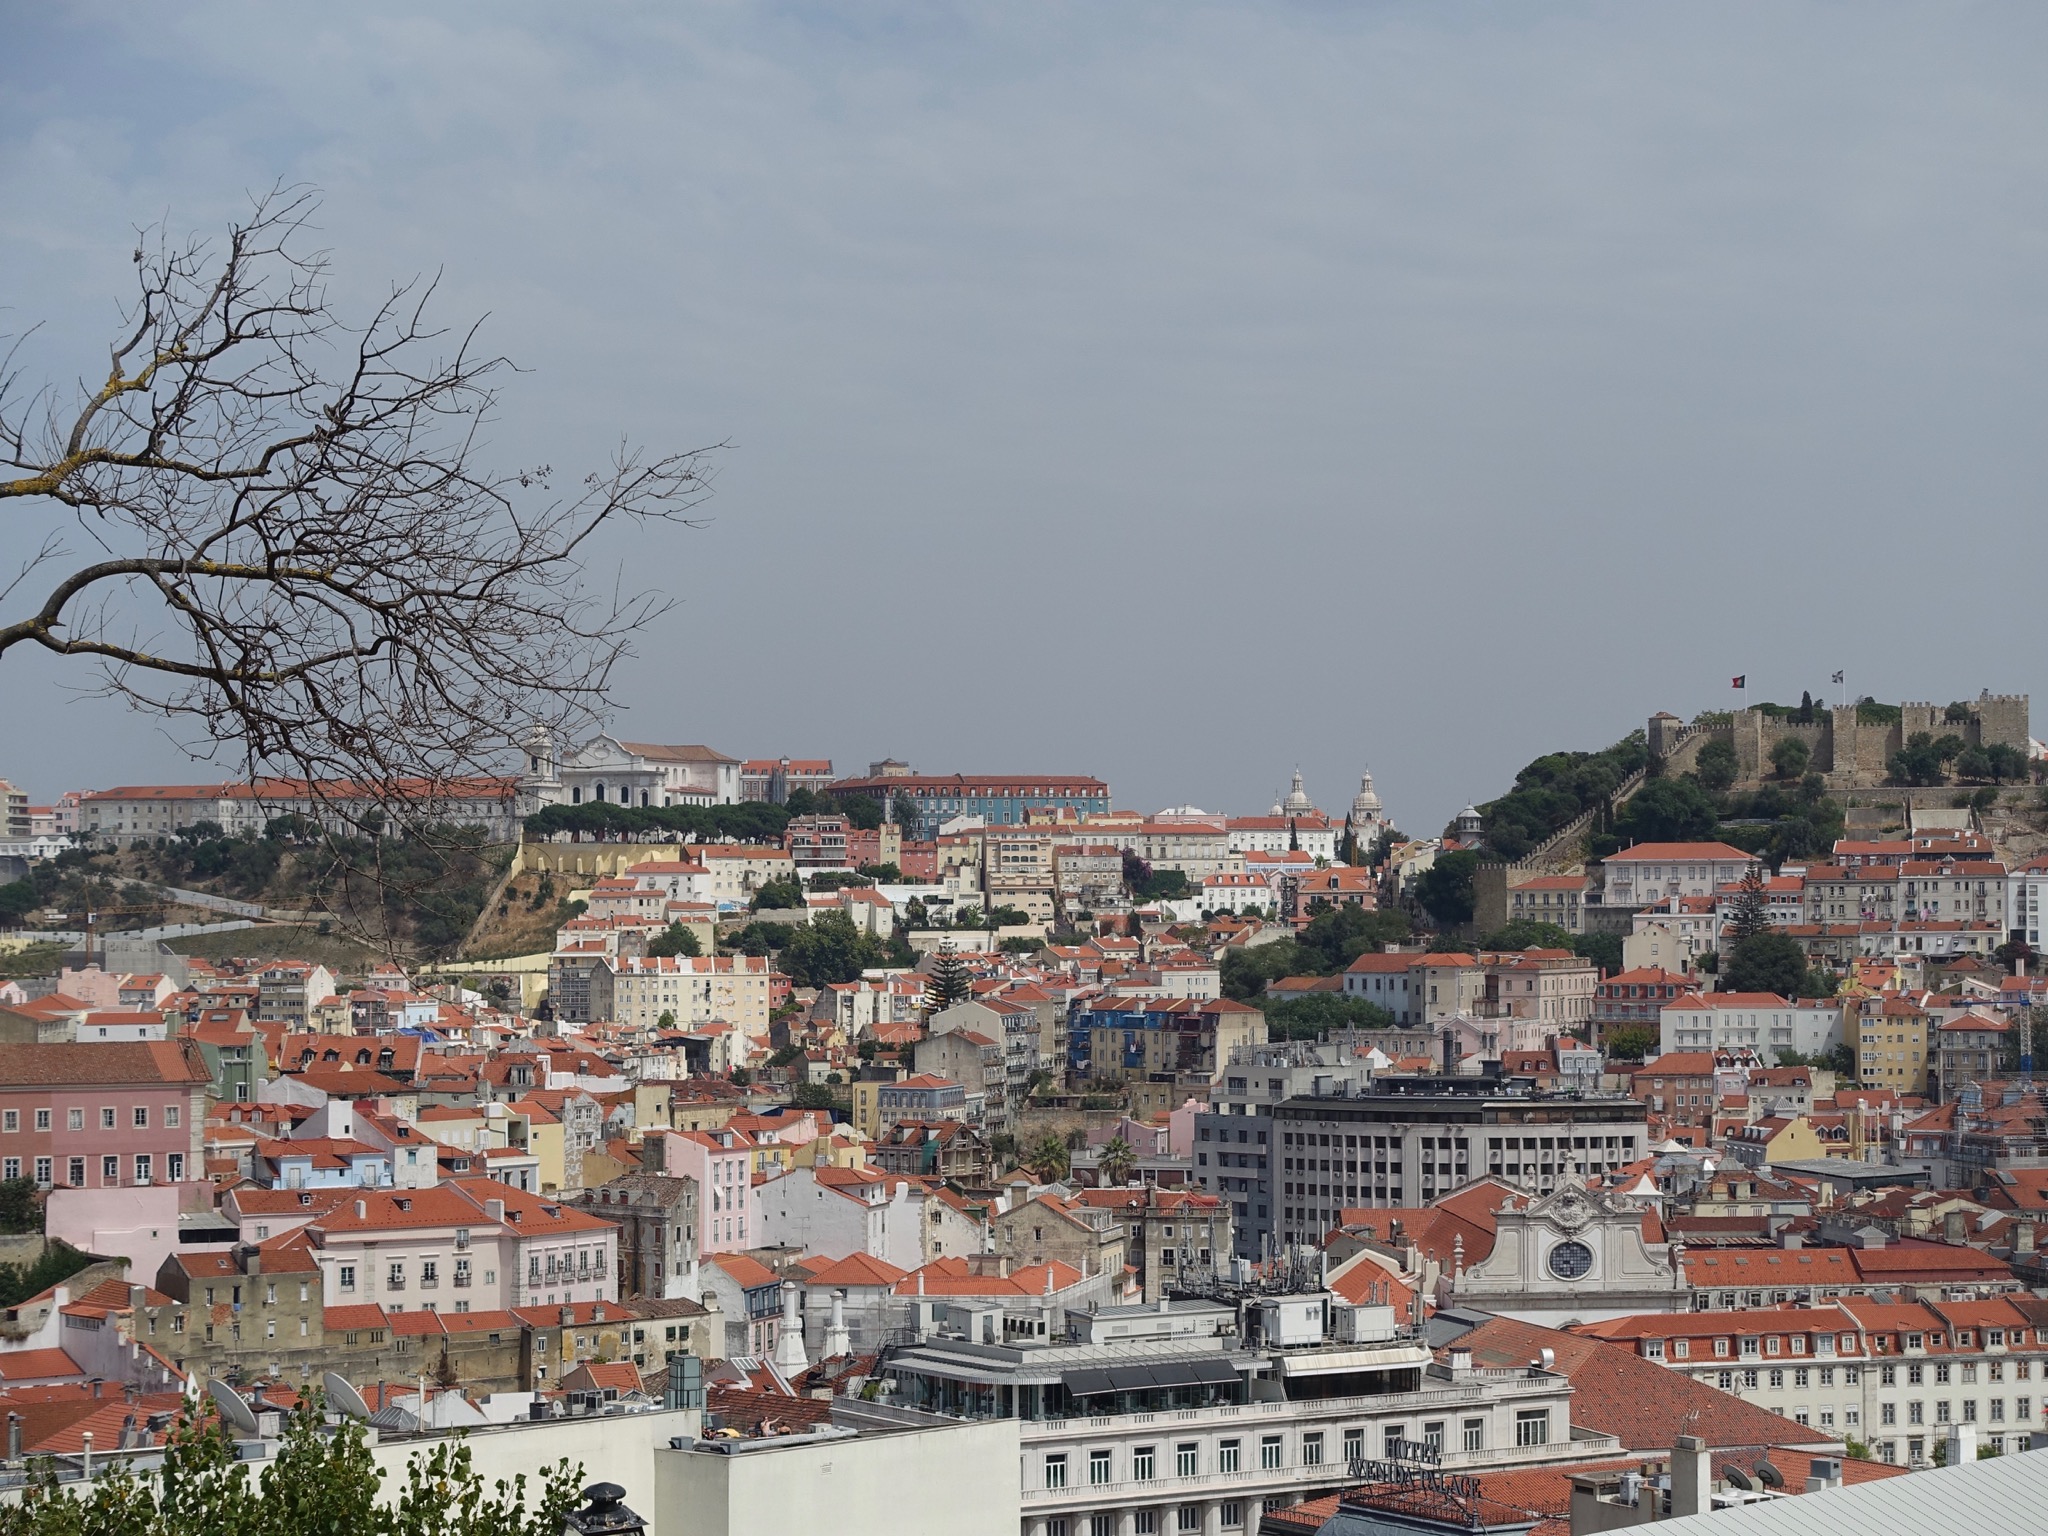 Photo 73 of 86 from the album Highlights Lisbon 2015.